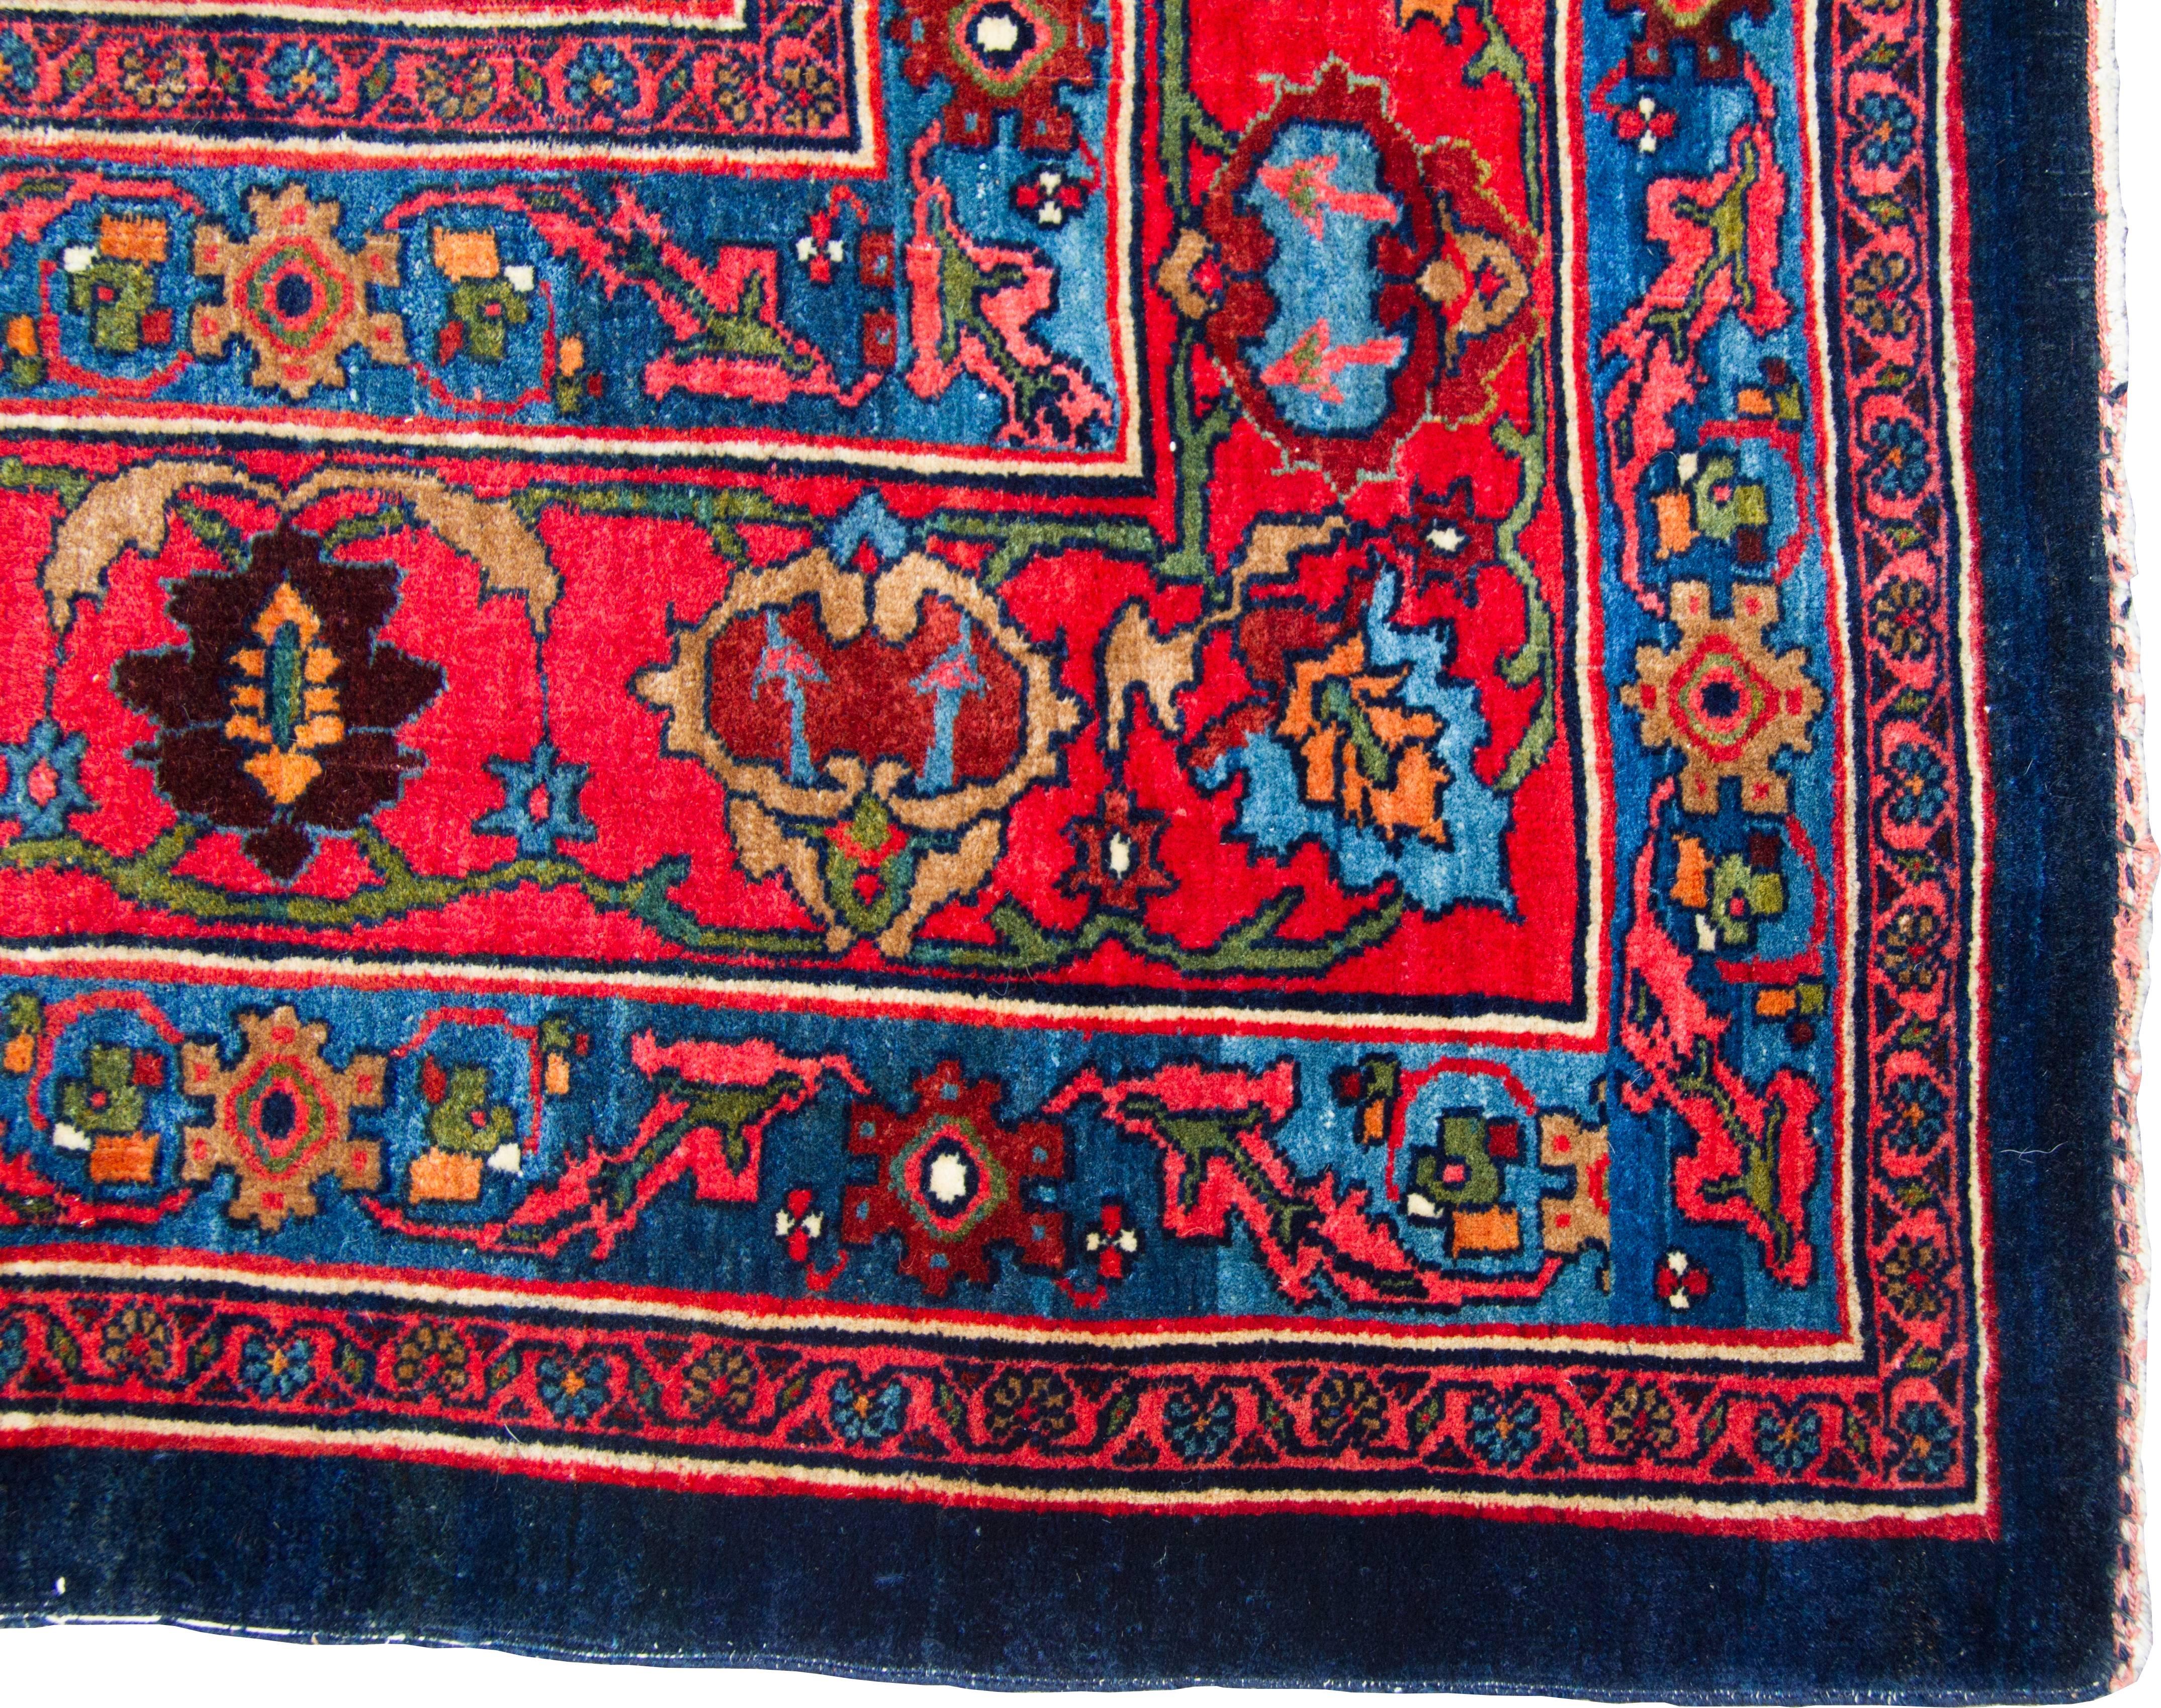 This is a beautiful Bidjar rug with a repeat pattern of roses on a beautiful blue.